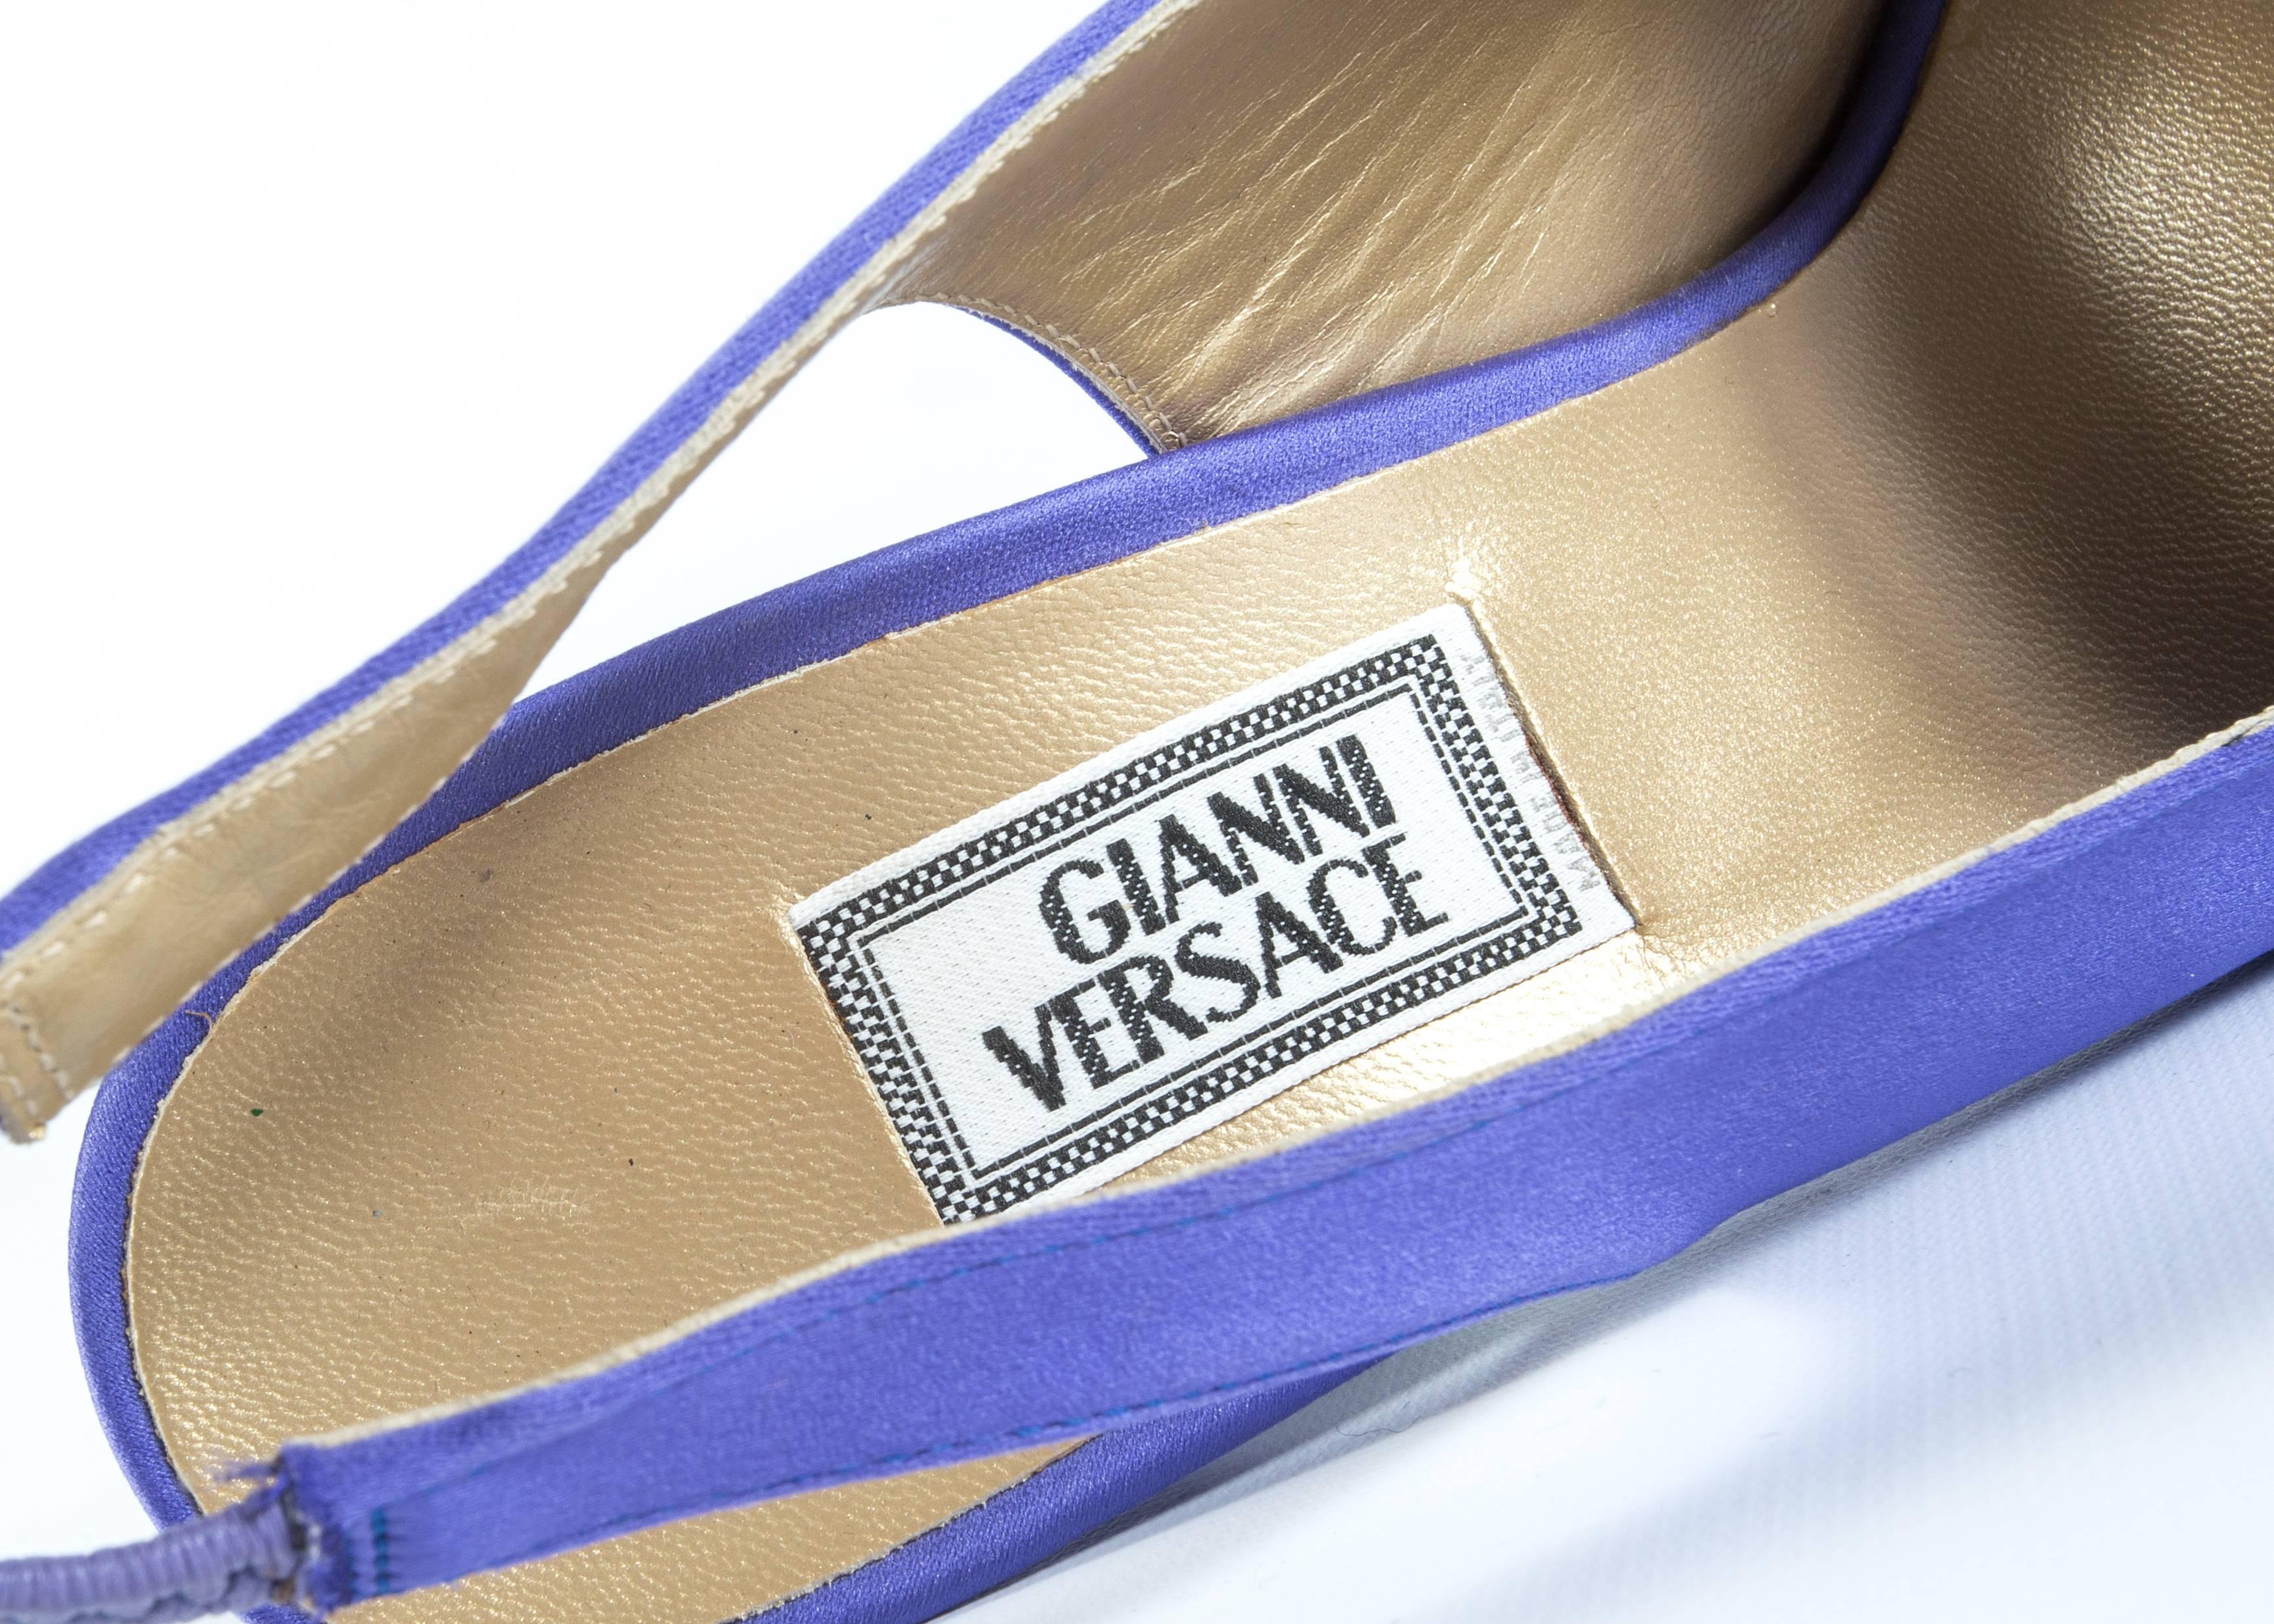 Purple Gianni Versace violet satin heels with diamante buckle, aw 1996